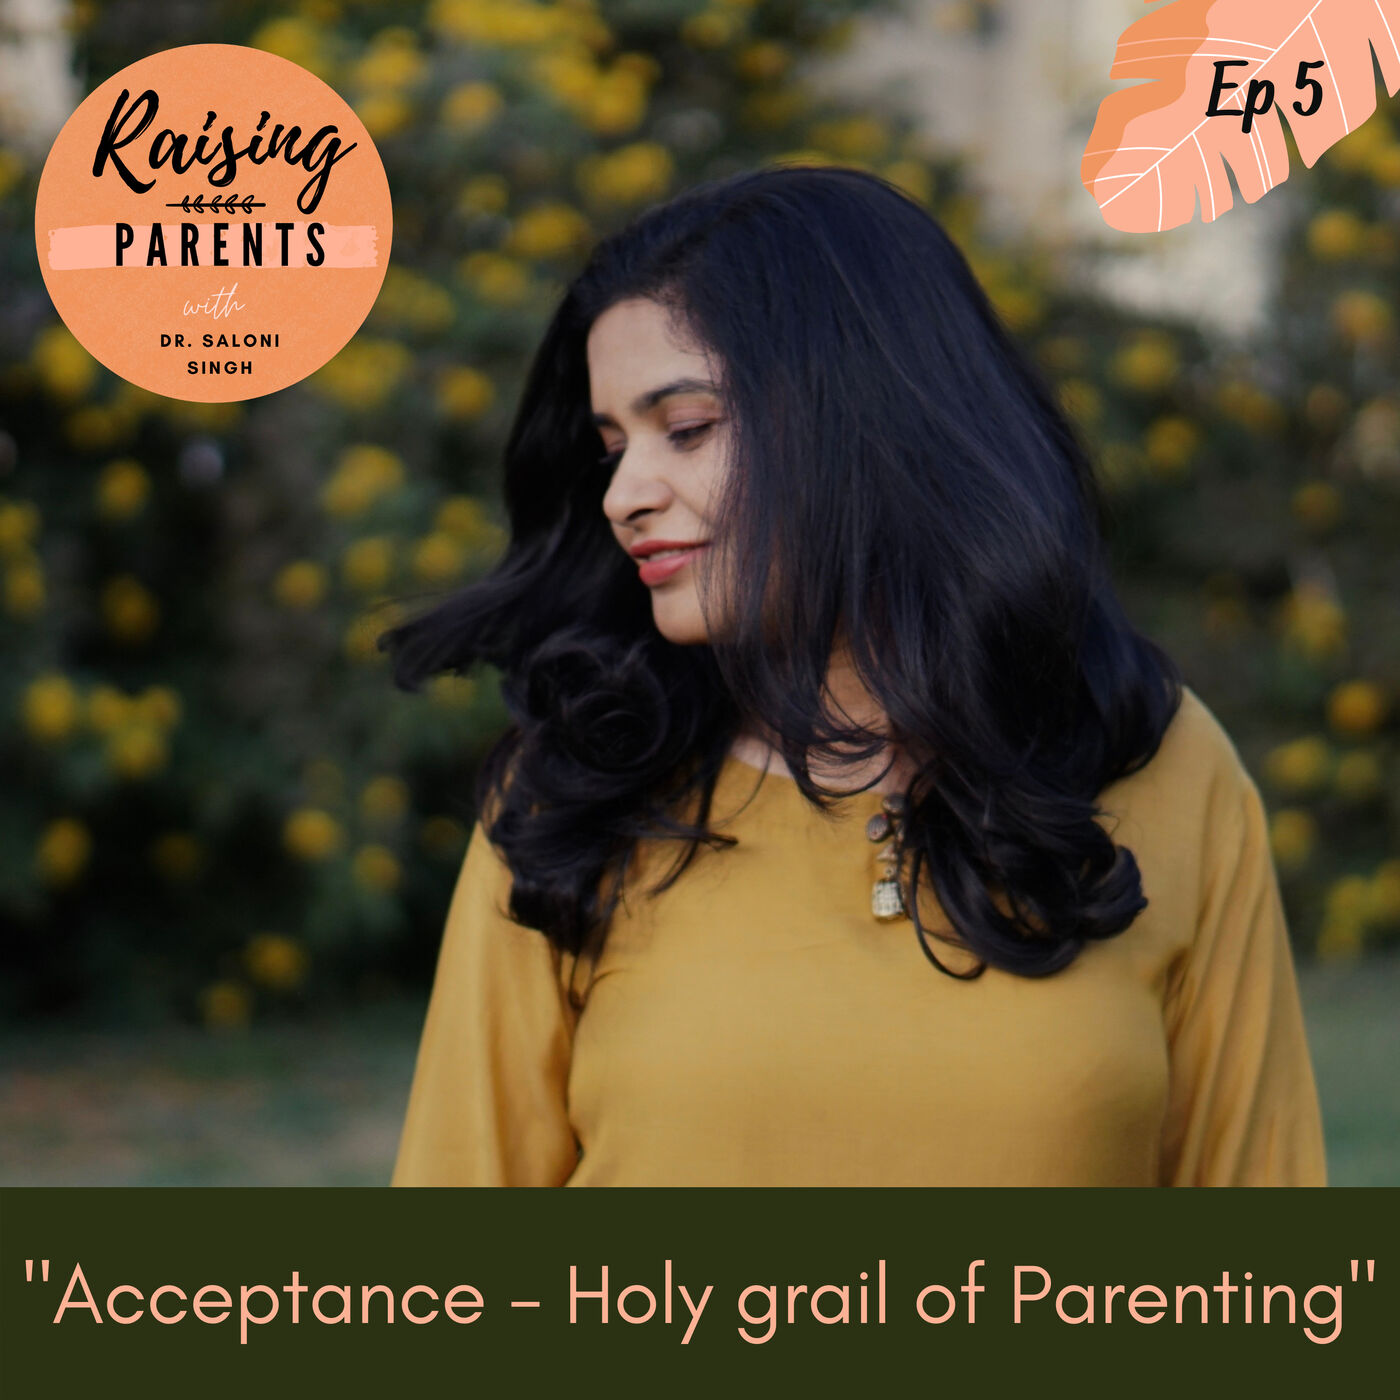 Acceptance - Holy grail of parenting